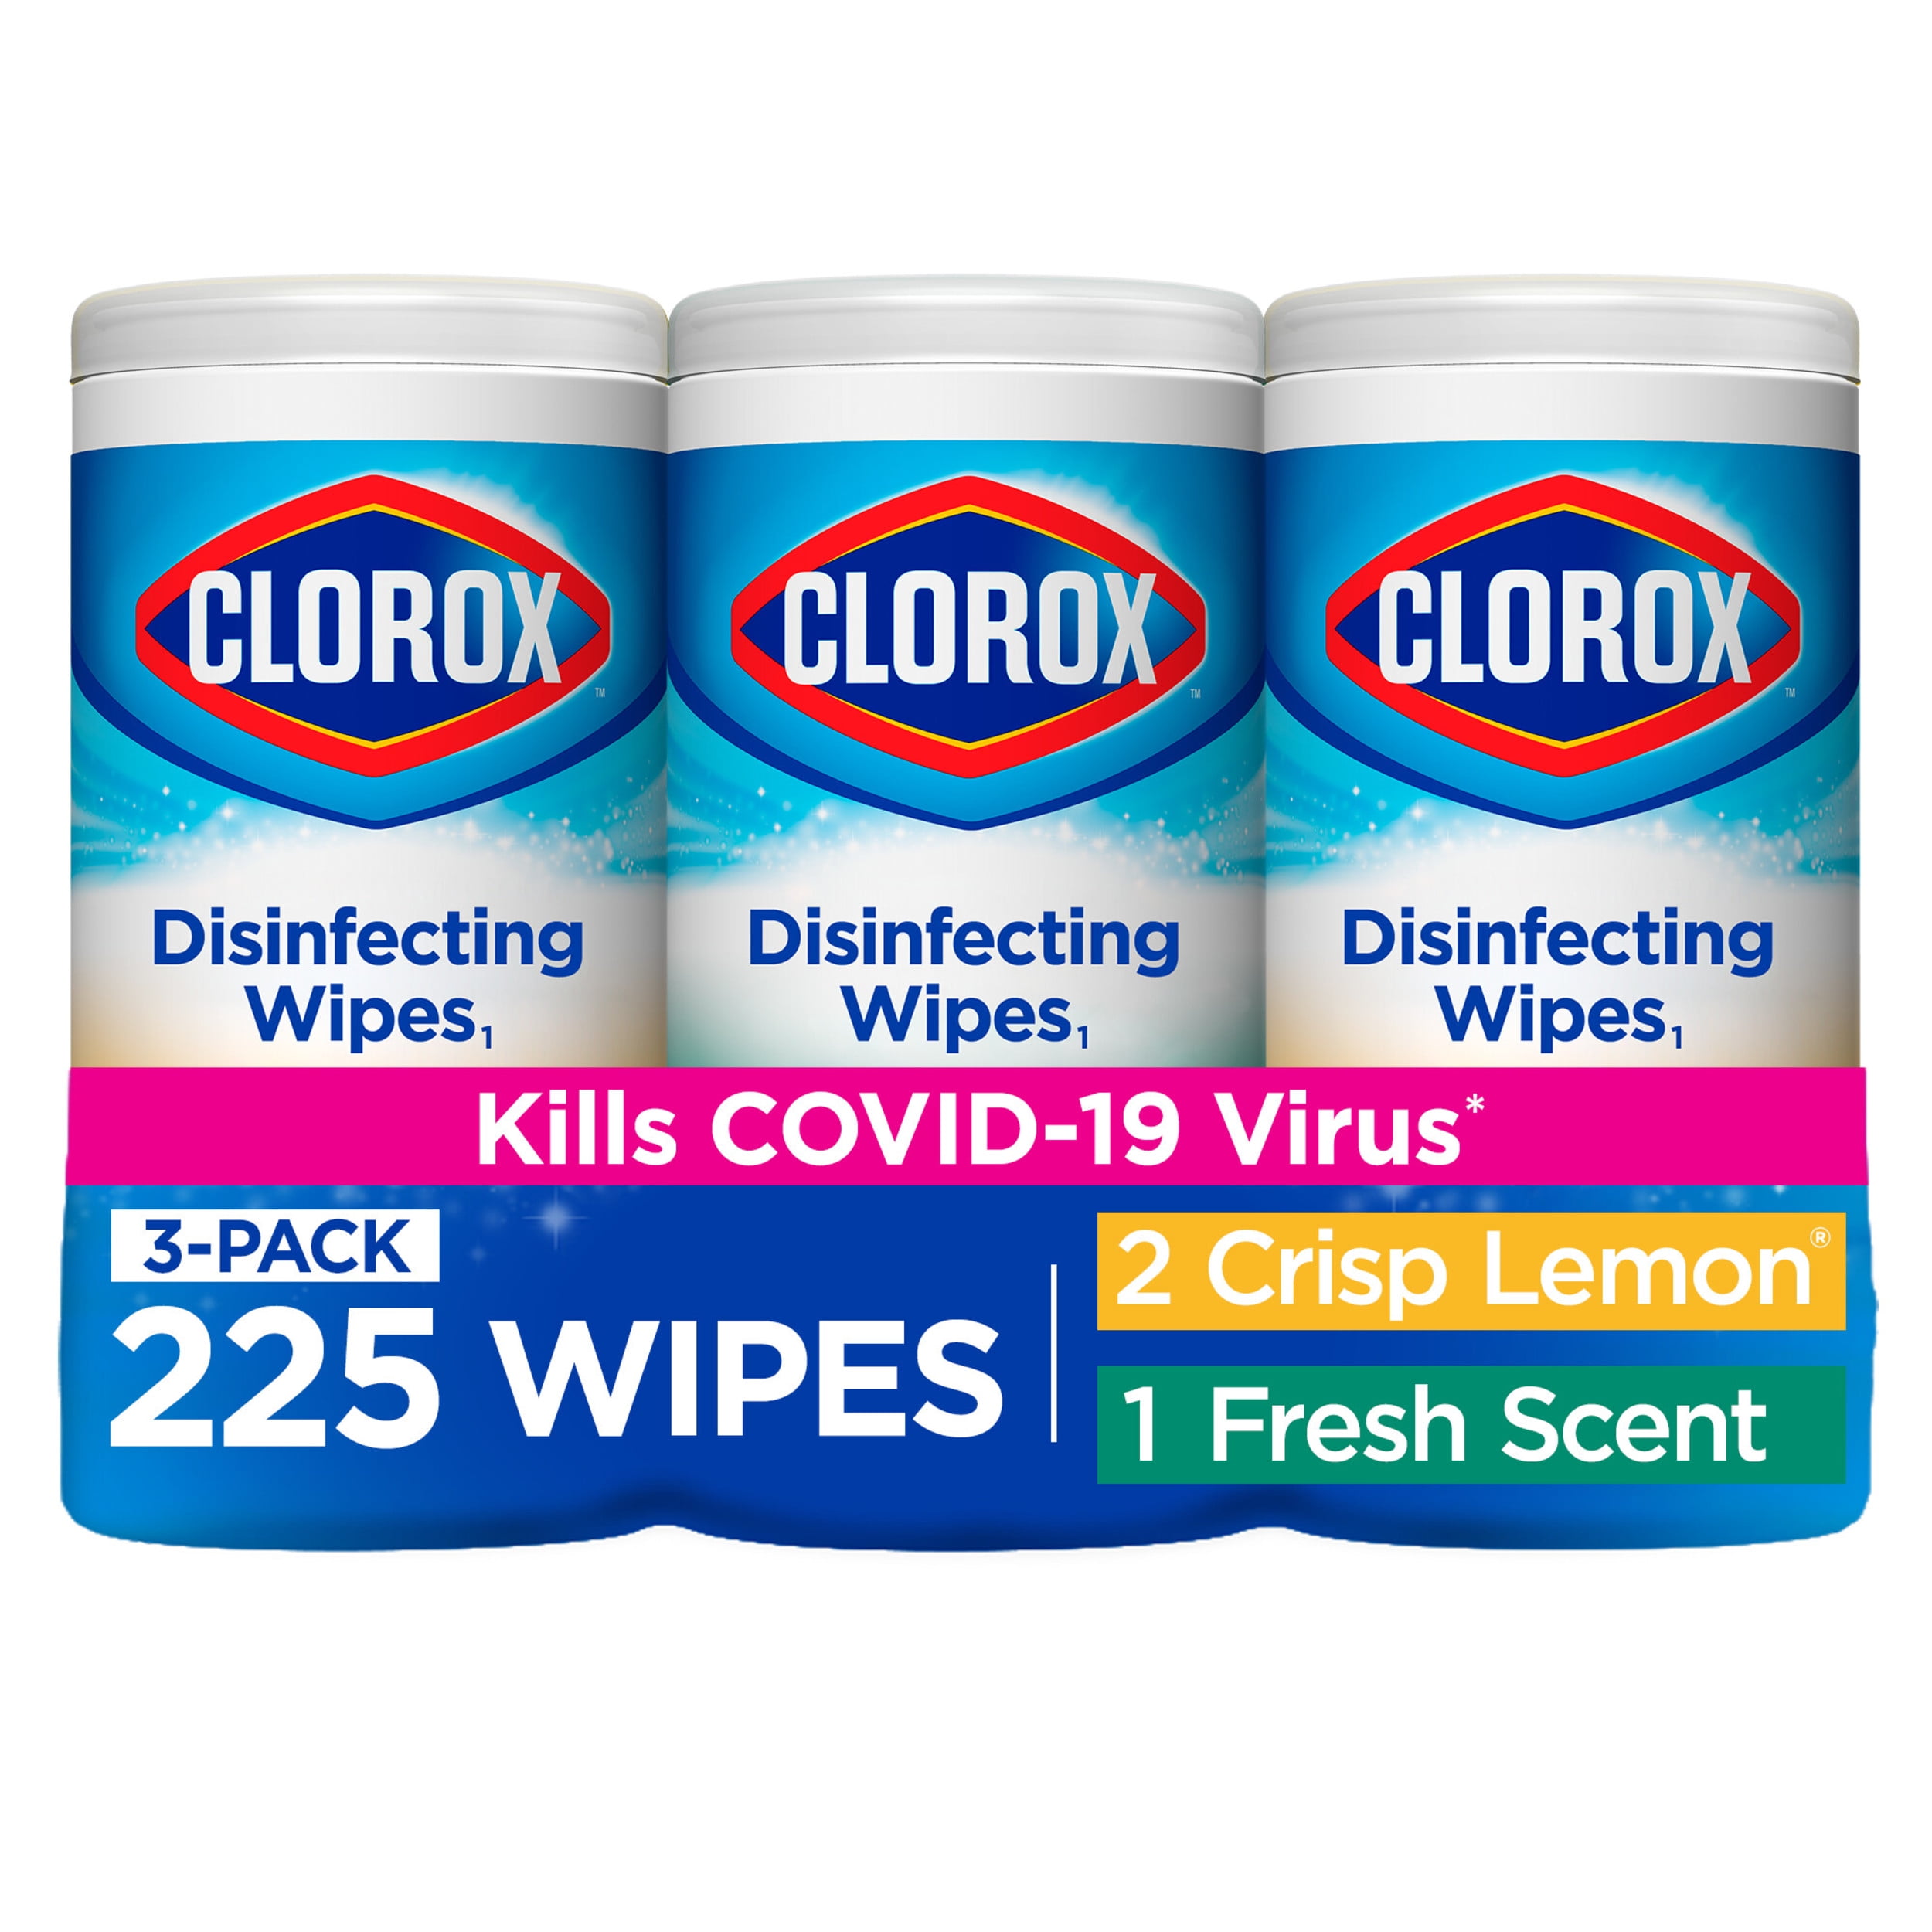 Essential Everyday Wipes, Furniture Wipes, Pre-Moistened, Lemon Scent, Cleaning Wipes